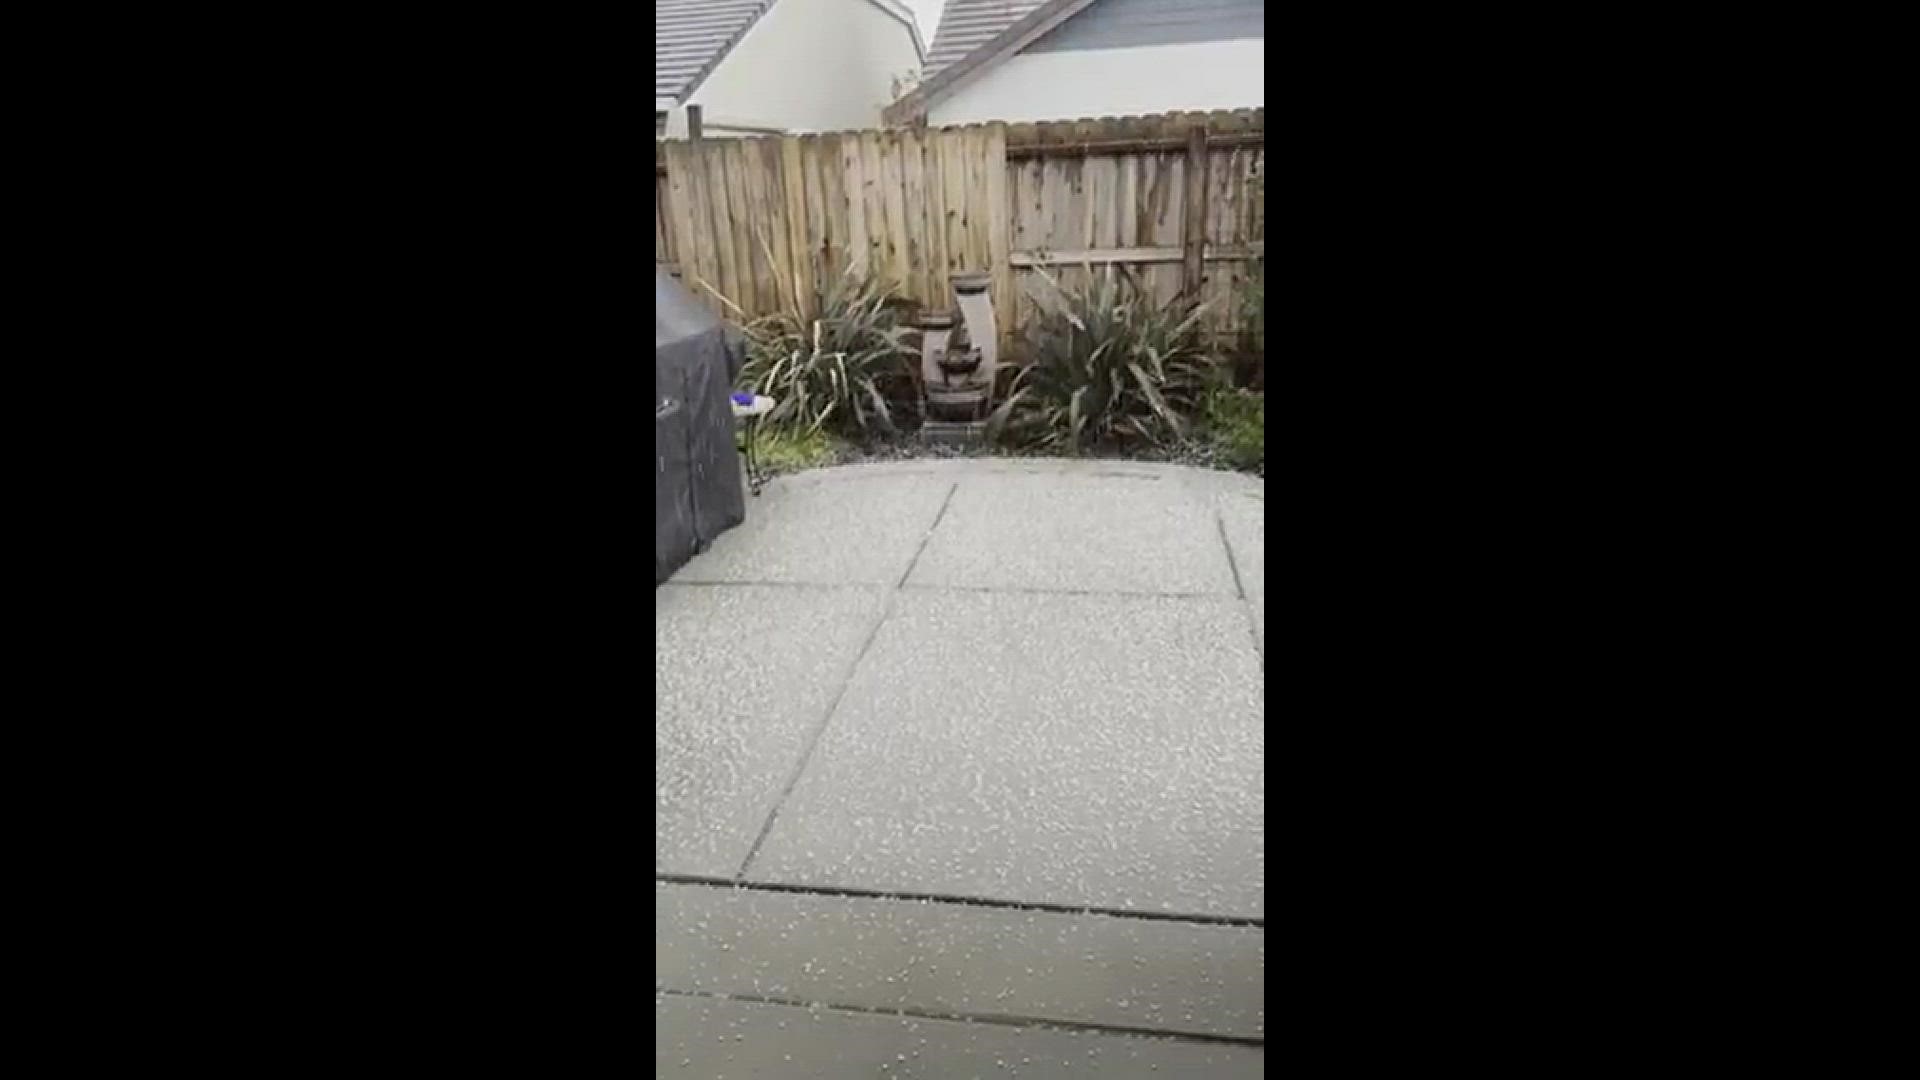 Thunder and hail in El Dorado Hills from Dec. 11.  (From Mike Ward)
Credit: Mike Ward